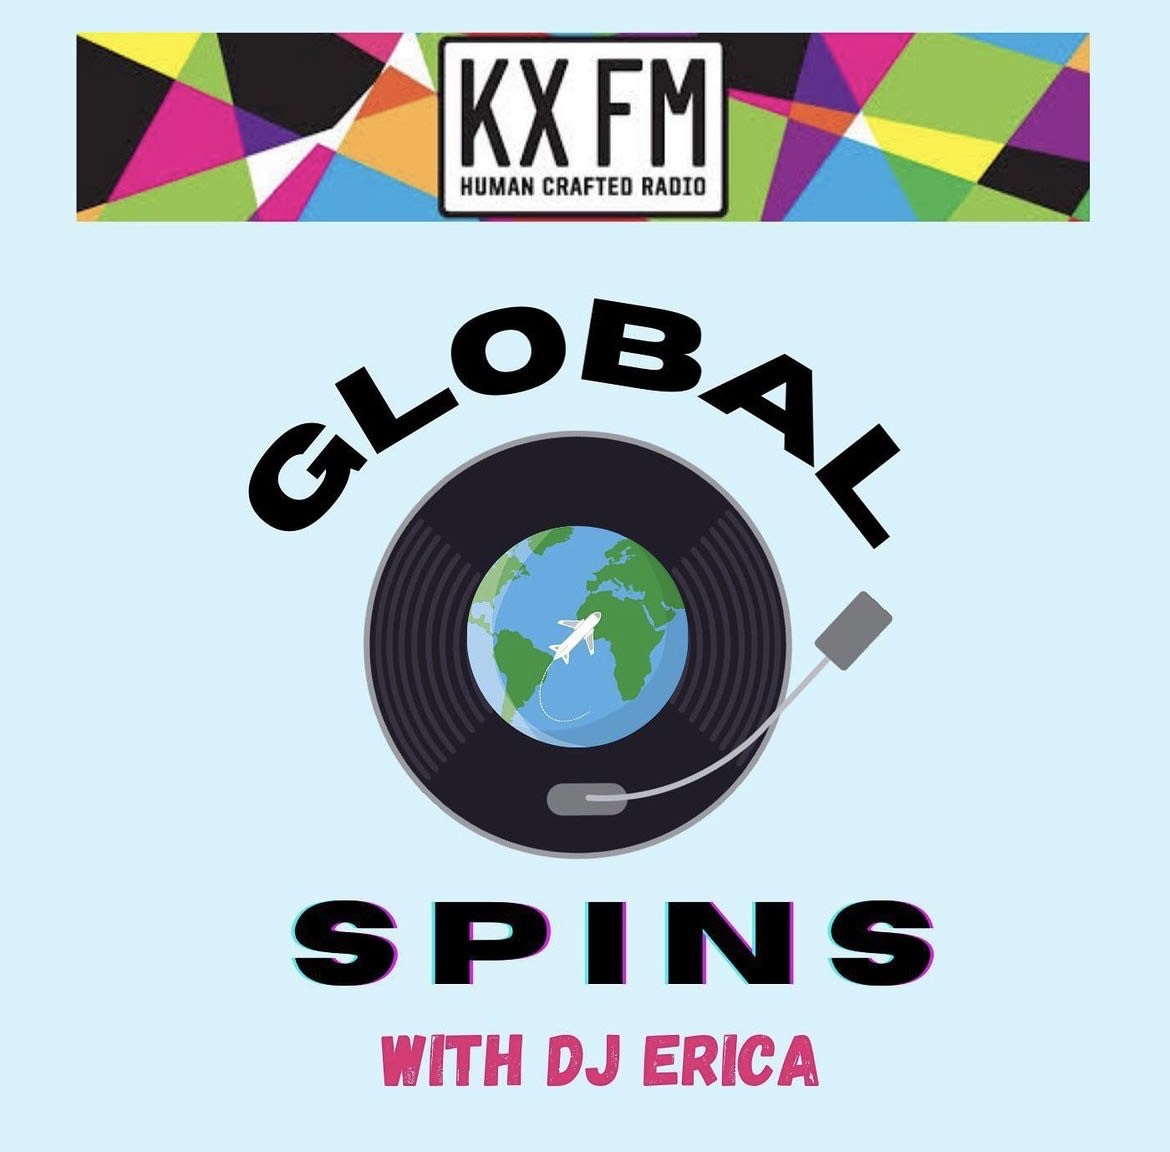 Live Now @KXFM GLOBAL SPINS Host DJ Erica Global Spins is a radio program that invites listeners to embark on a musical journey around the world. Each Tuesday from 10-11 pm, DJ @global.spins on Instagram Listen kxfmradio.org The KX FM app